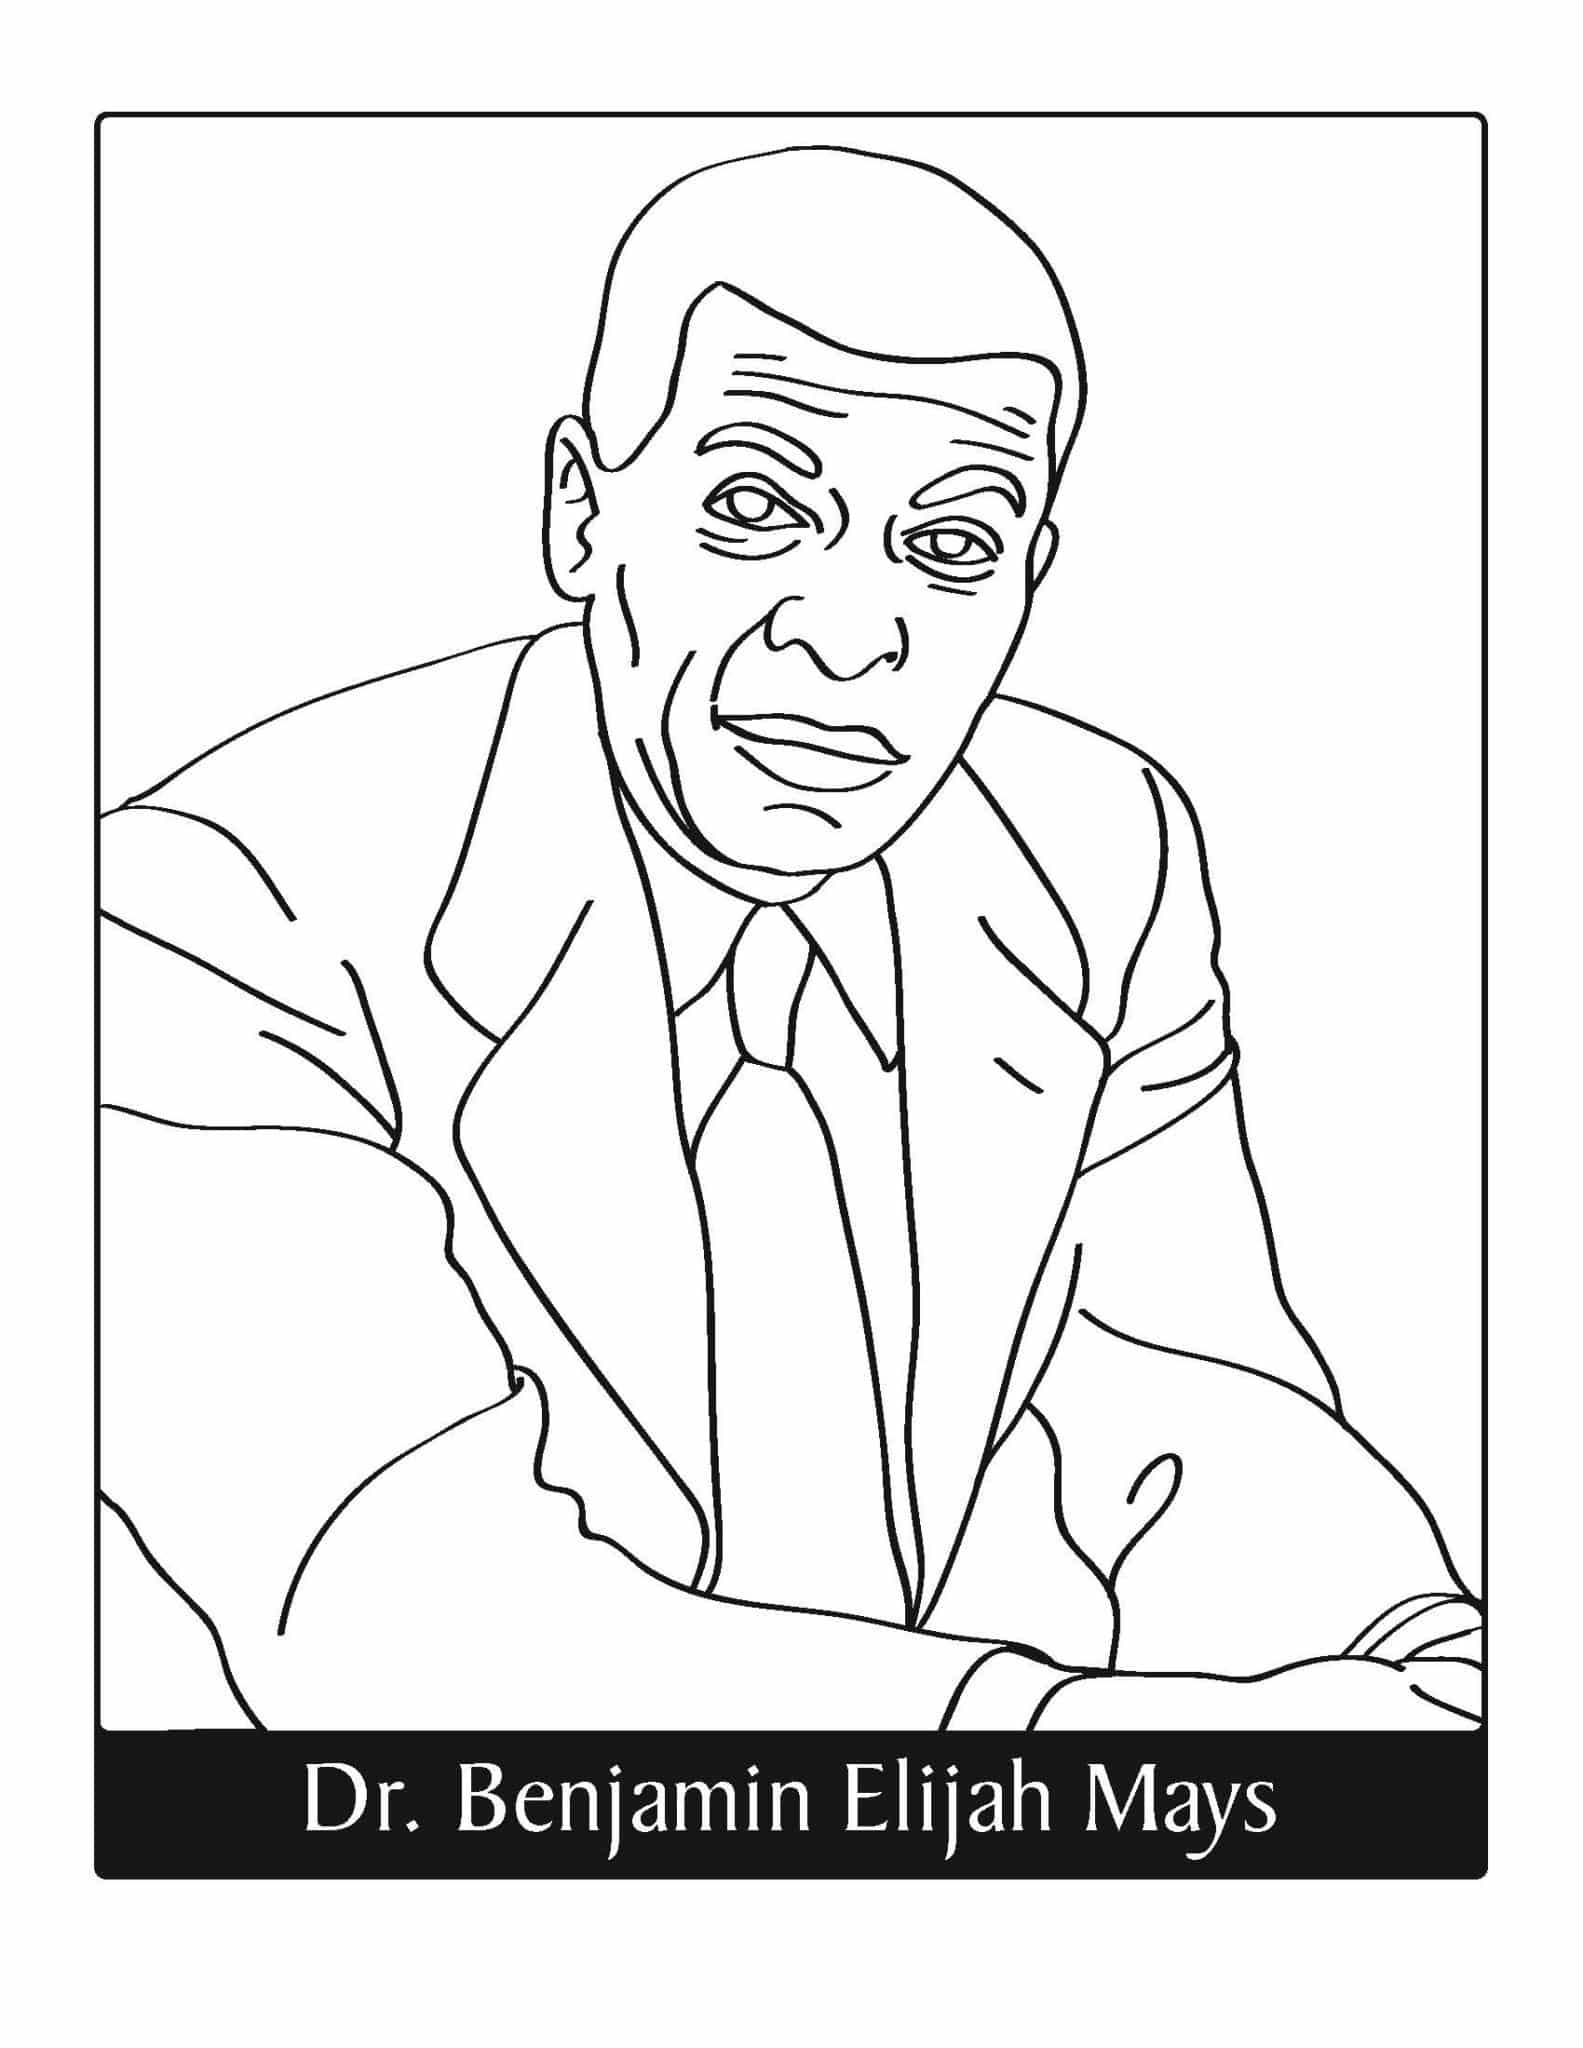 30 Free Coloring Pages to Celebrate Black Faith Leaders